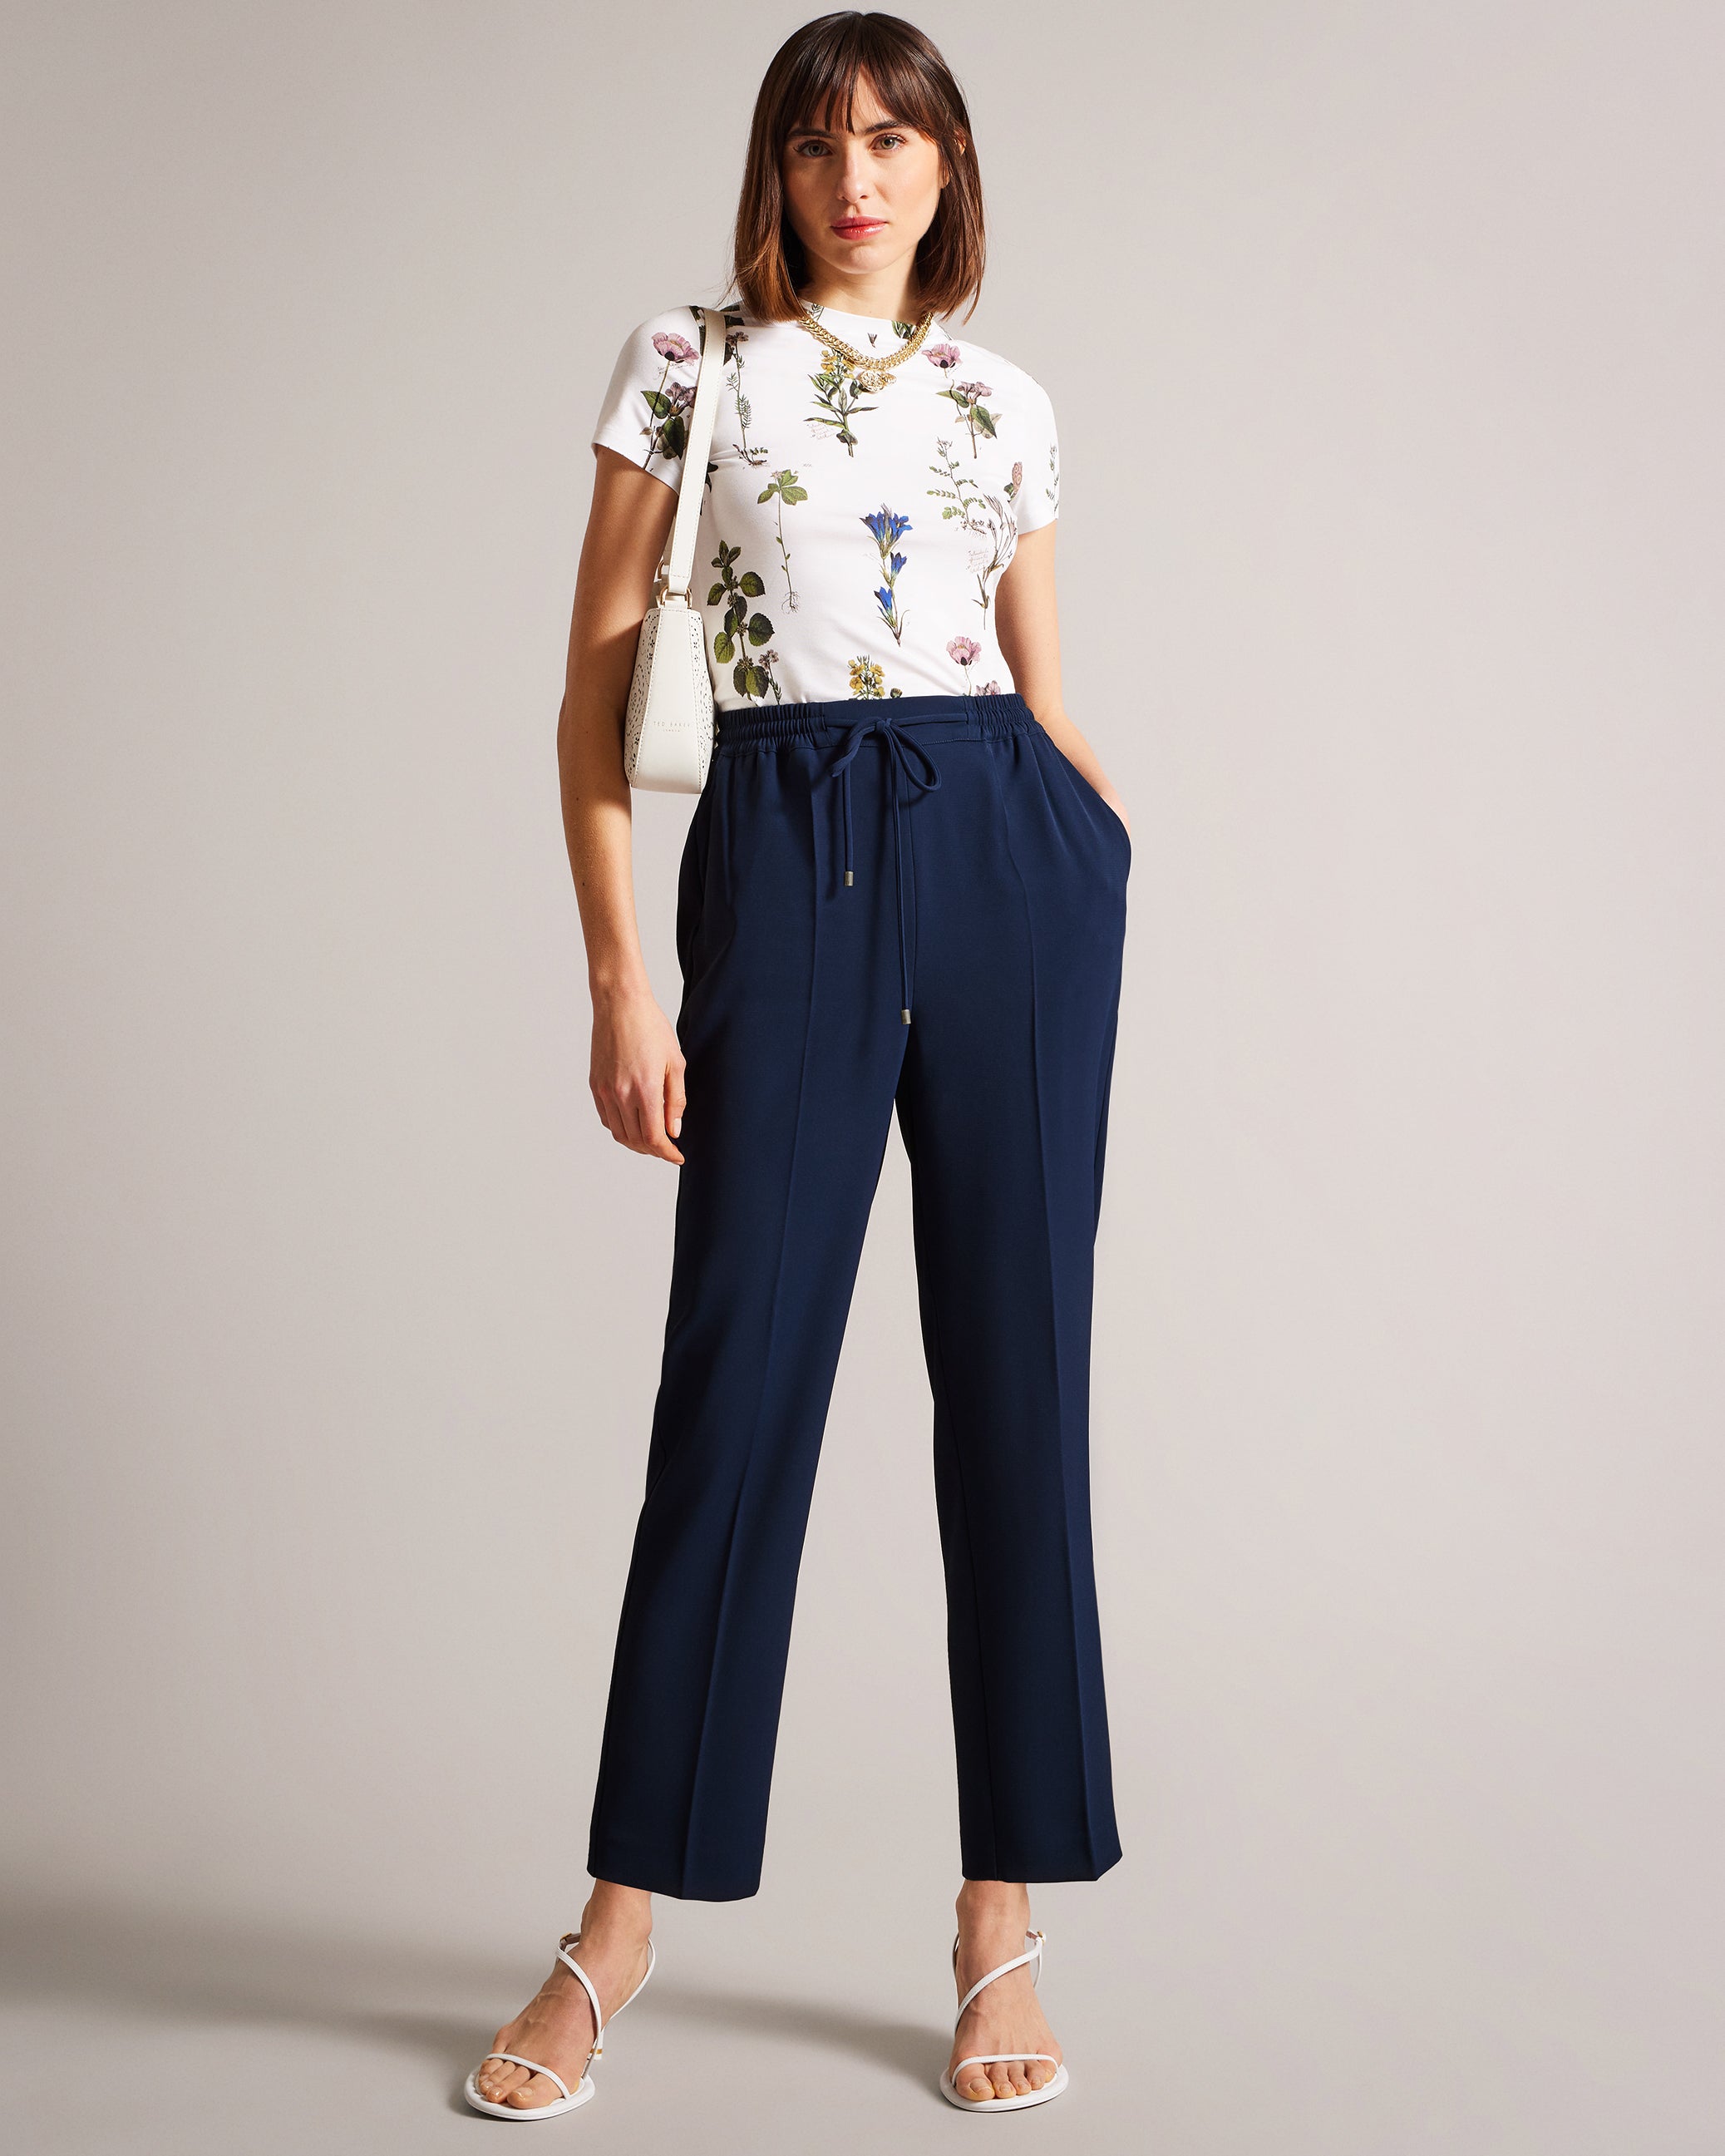 Ted Baker Quarts Belted Straight Leg Trousers, Navy, 28R